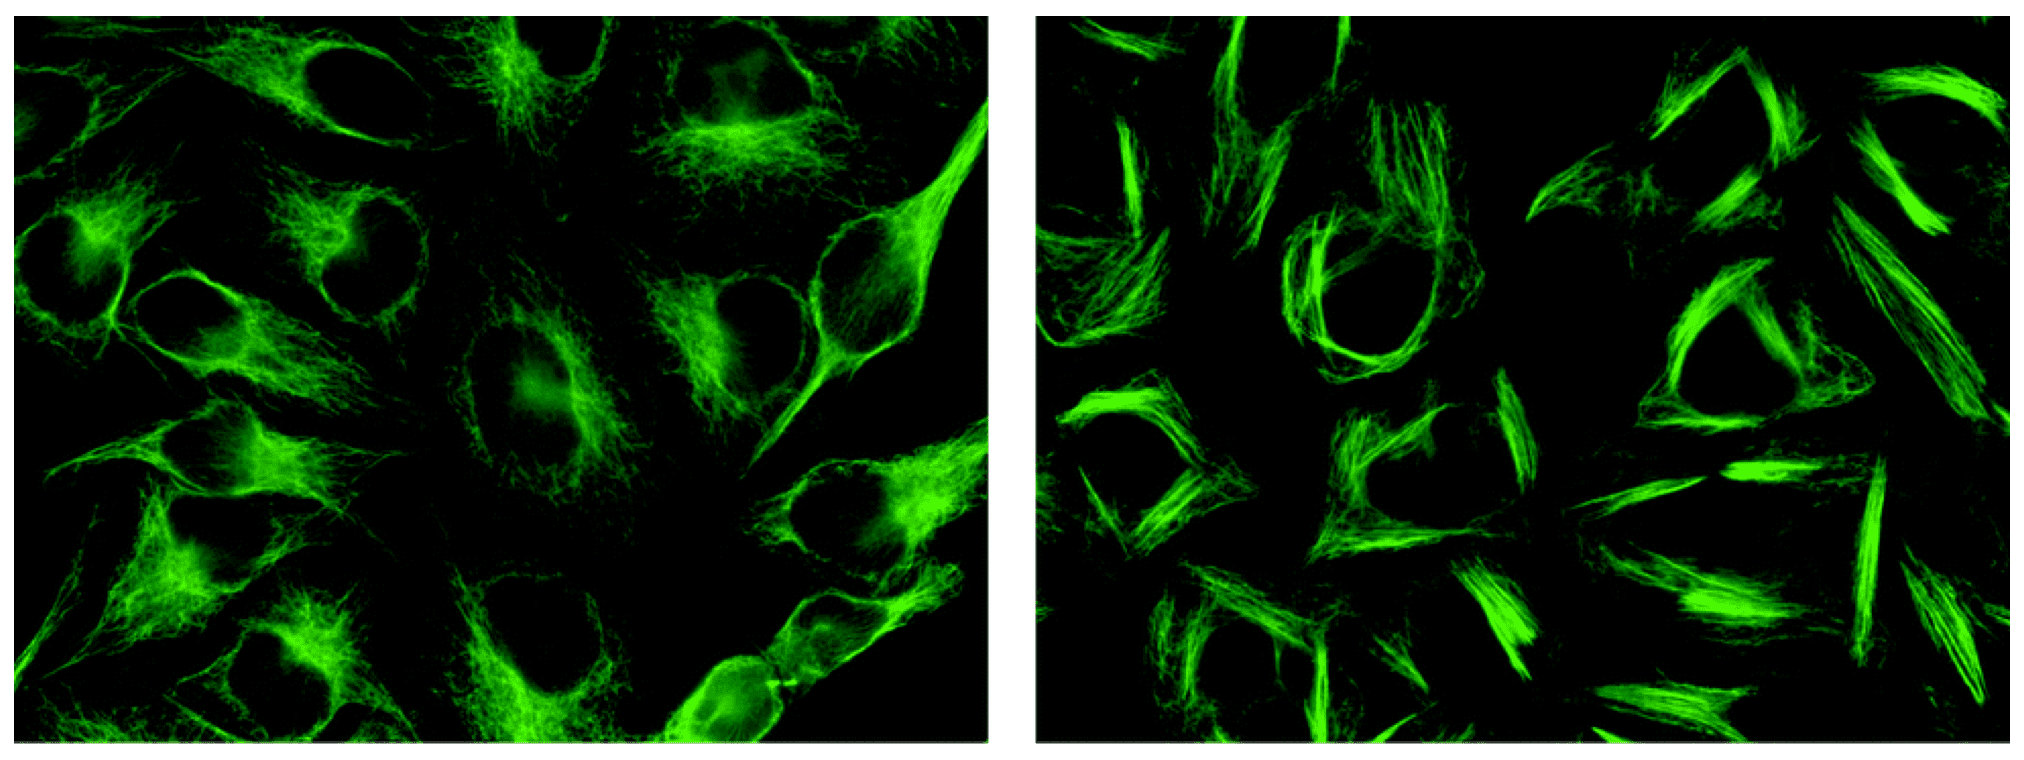 Microtubule dynamic disruption by paclitaxel (right), a microtubule toxins that can be used in ADC development, comparing to control cells (left) (Nat. Prod. Rep.,2014).